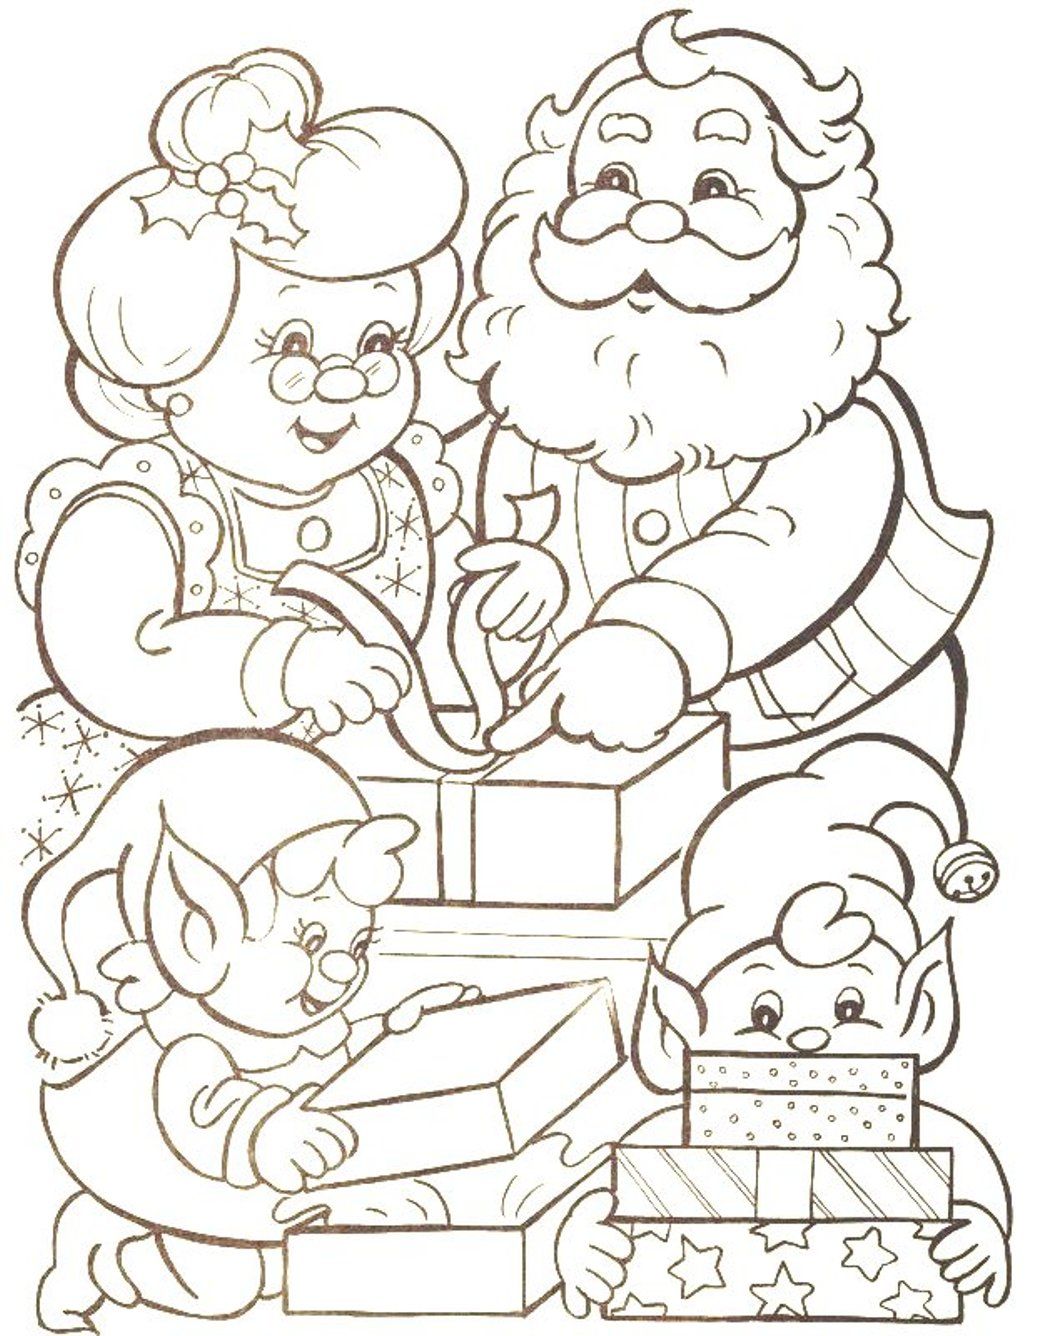 Elf Coloring Picture : Craft Christmas Elf Coloring Pages. Elf ...